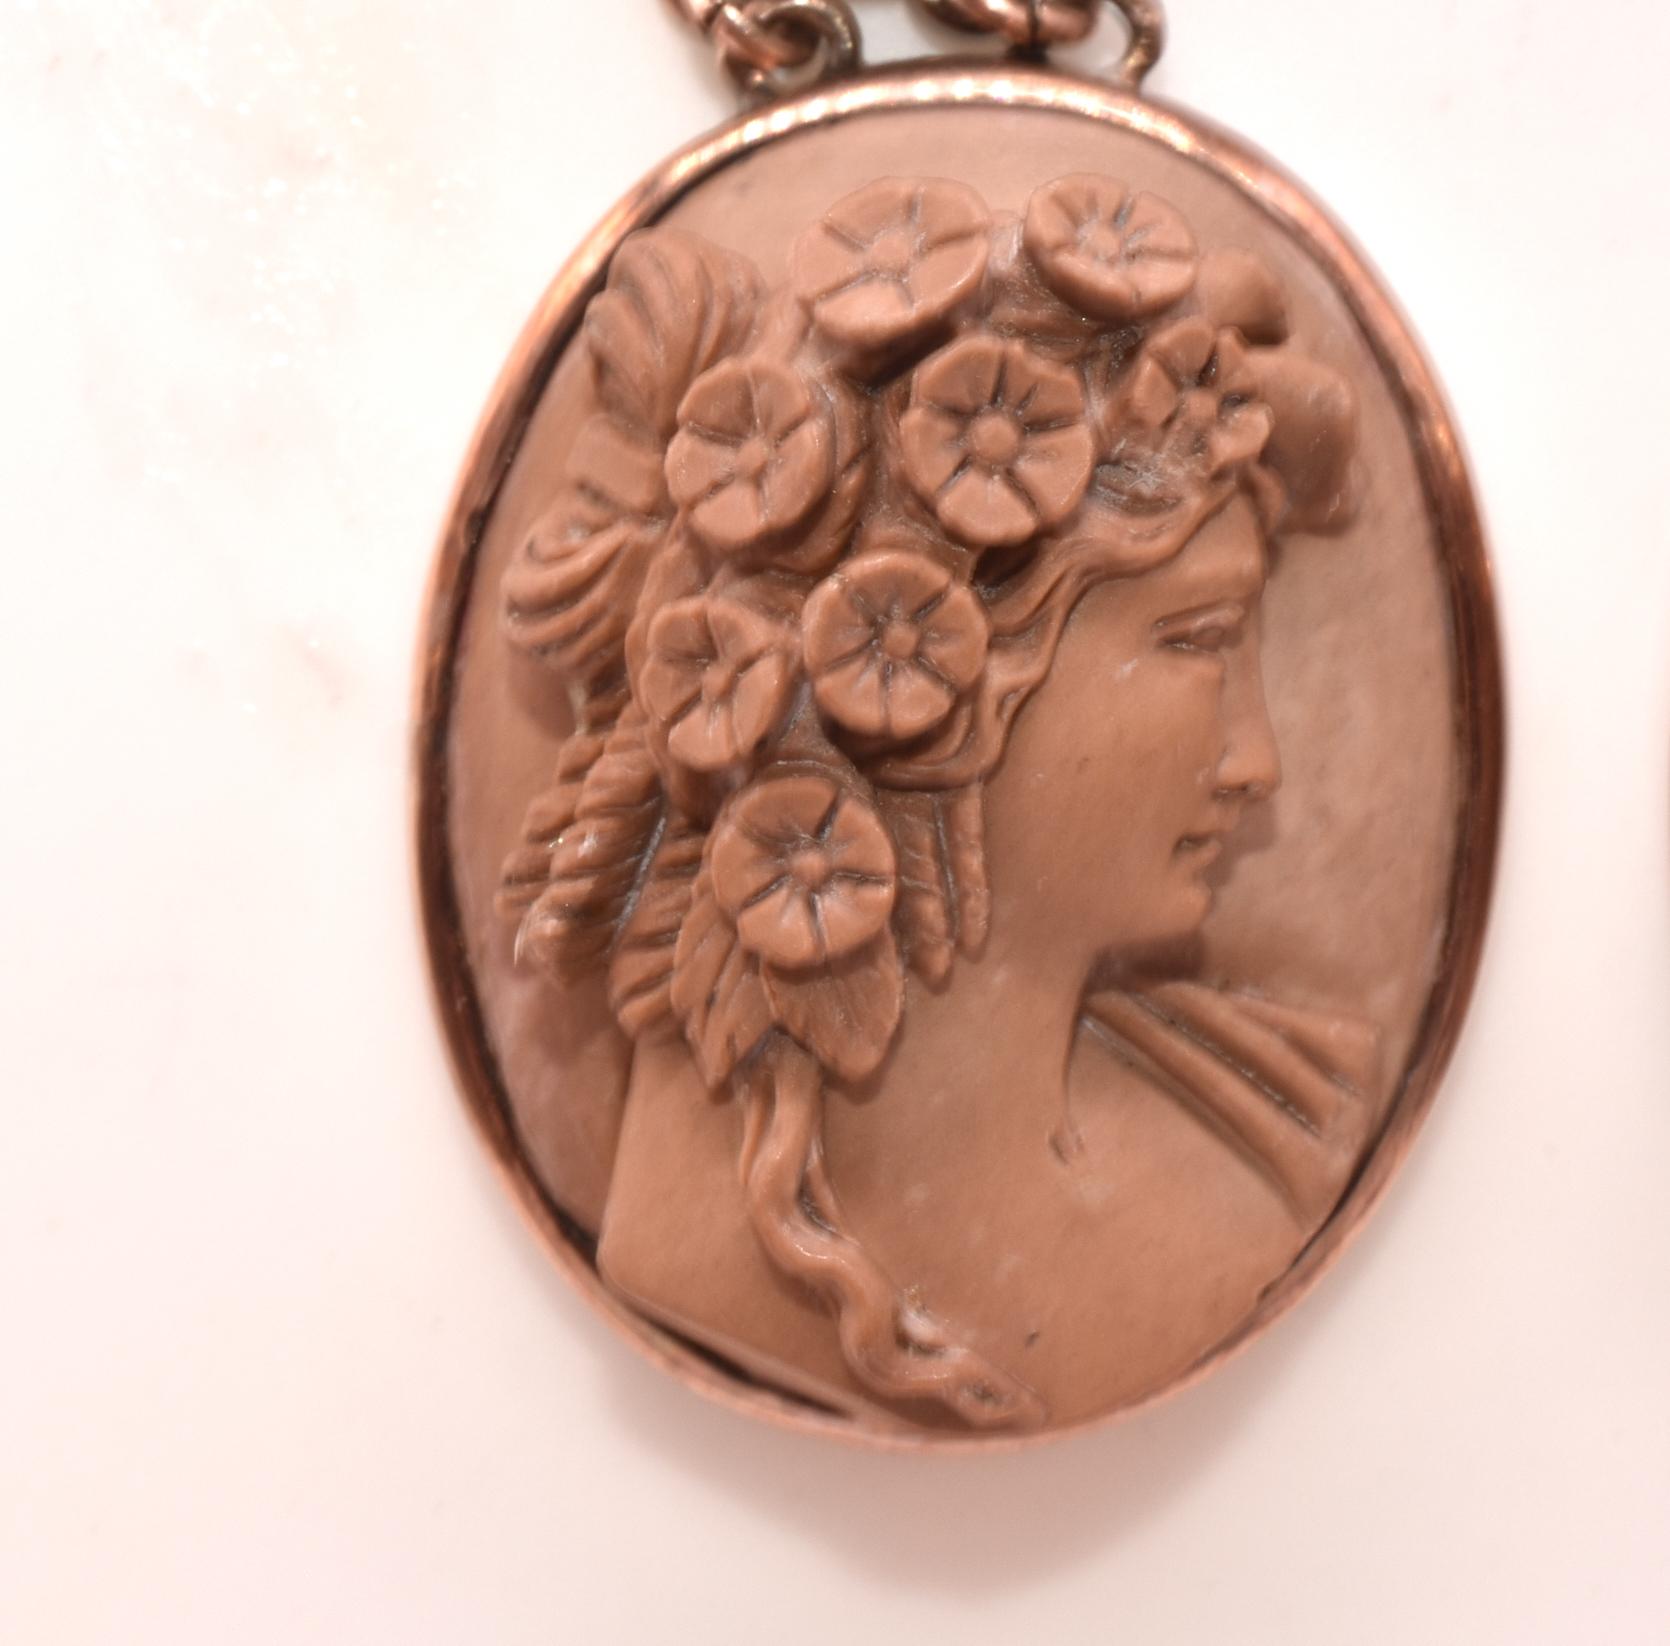 C1880 9K Victorian Lava Cameo earrings depicting Flora, the goddess of flowering plants, with the power to make flowers bloom and grow. The earrings possibly also depict a nymph bedecked with garlands of flowers. Both top and bottom cameos are